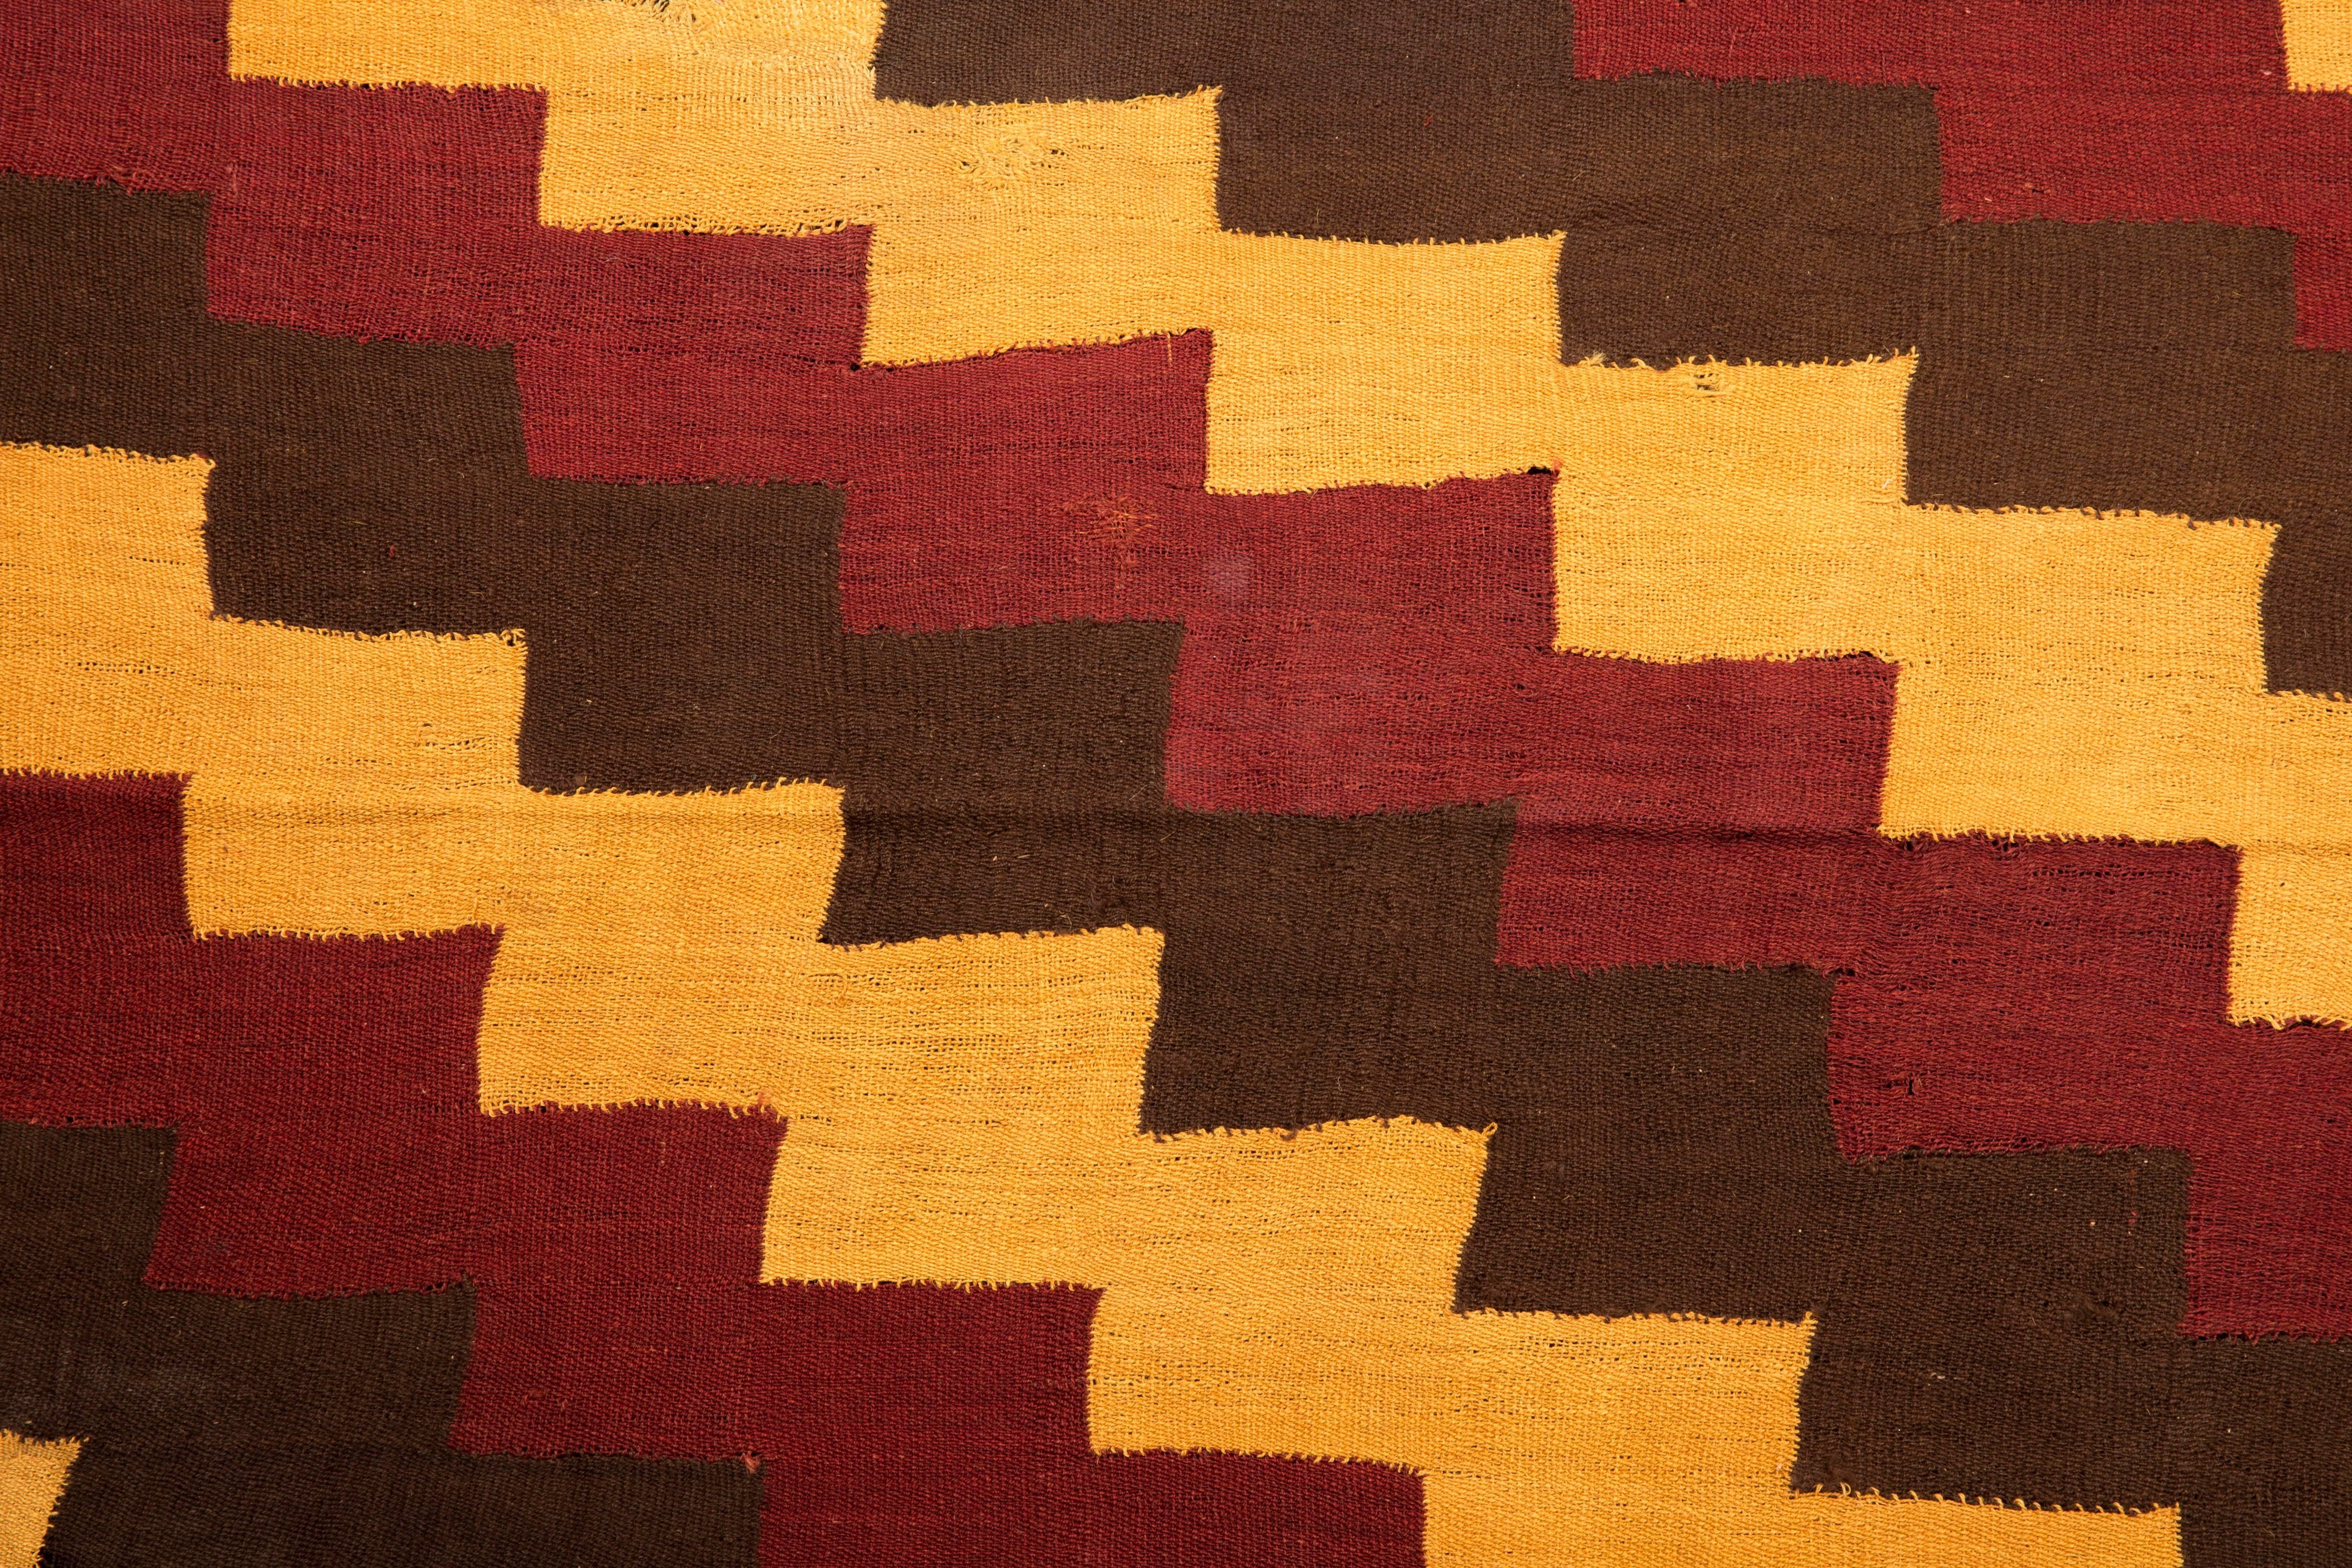 Complete Pre-Columbian Nazca textile with stepped zig-zag design in yellow, ochre red, and brown/black shades with yellow fringes.